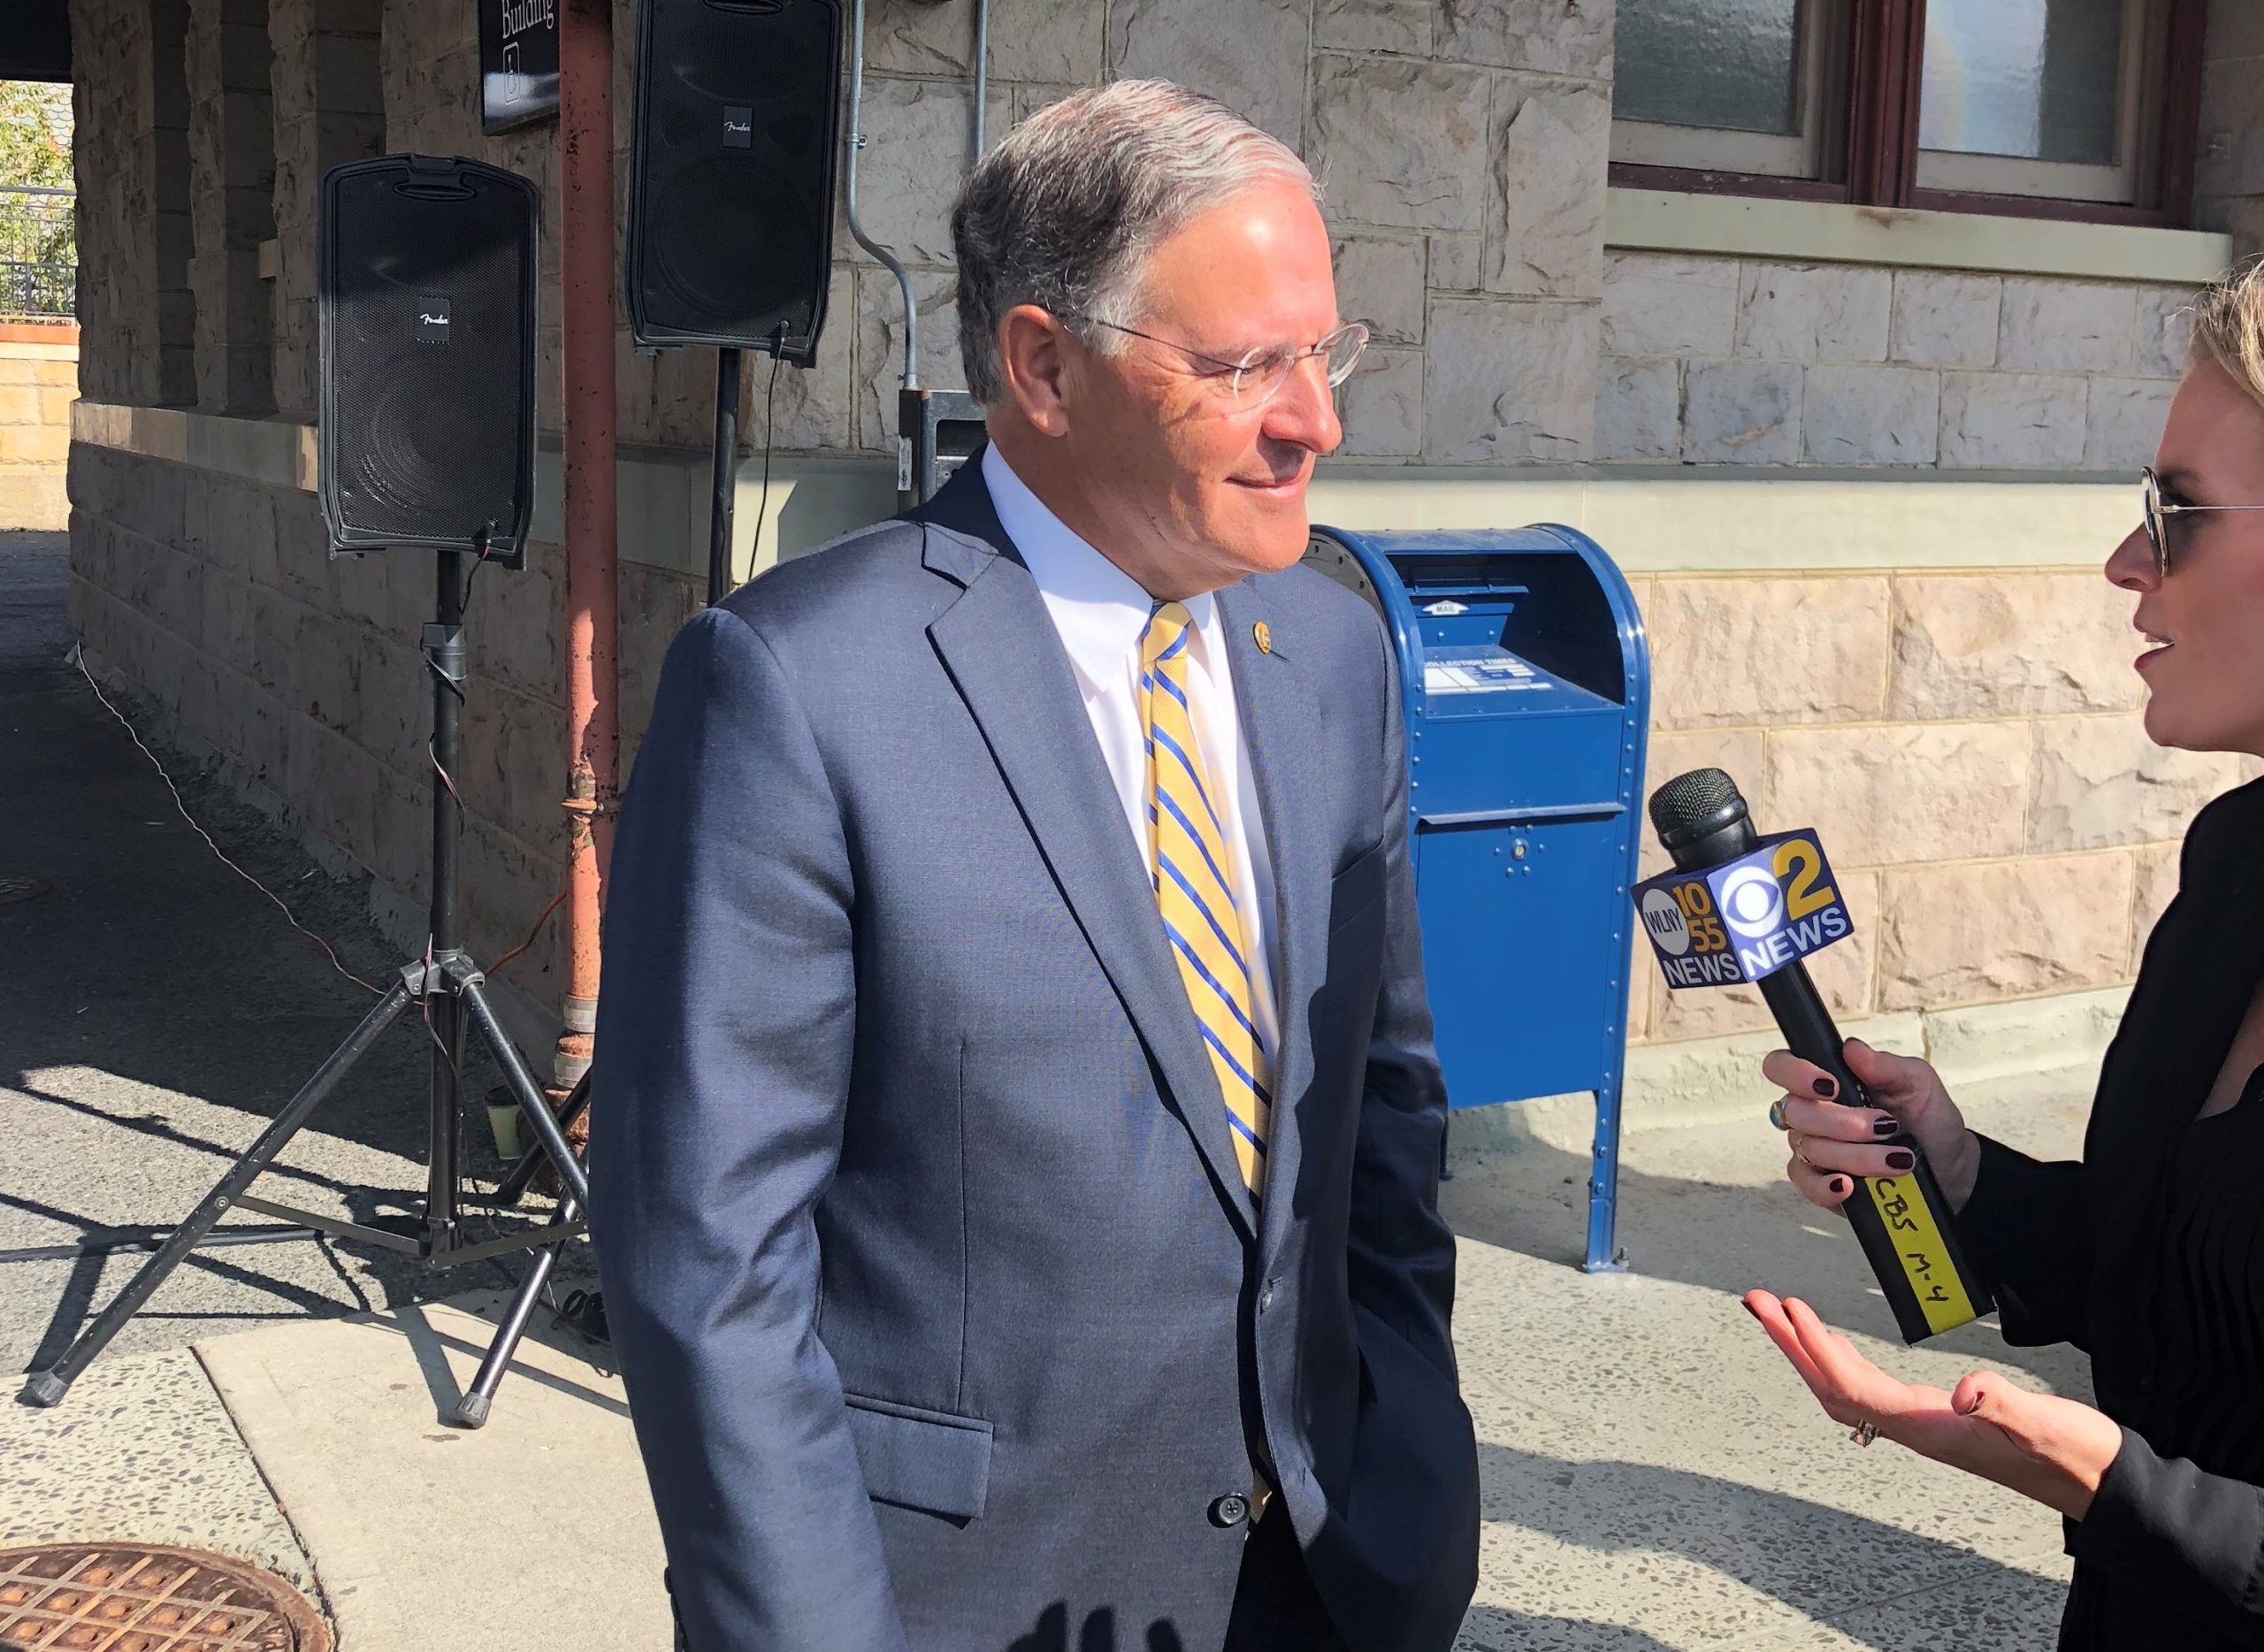 Analysis of Bramnick’s perspective on Murphy Budget: ‘It’s Not Fair’ – Insider NJ